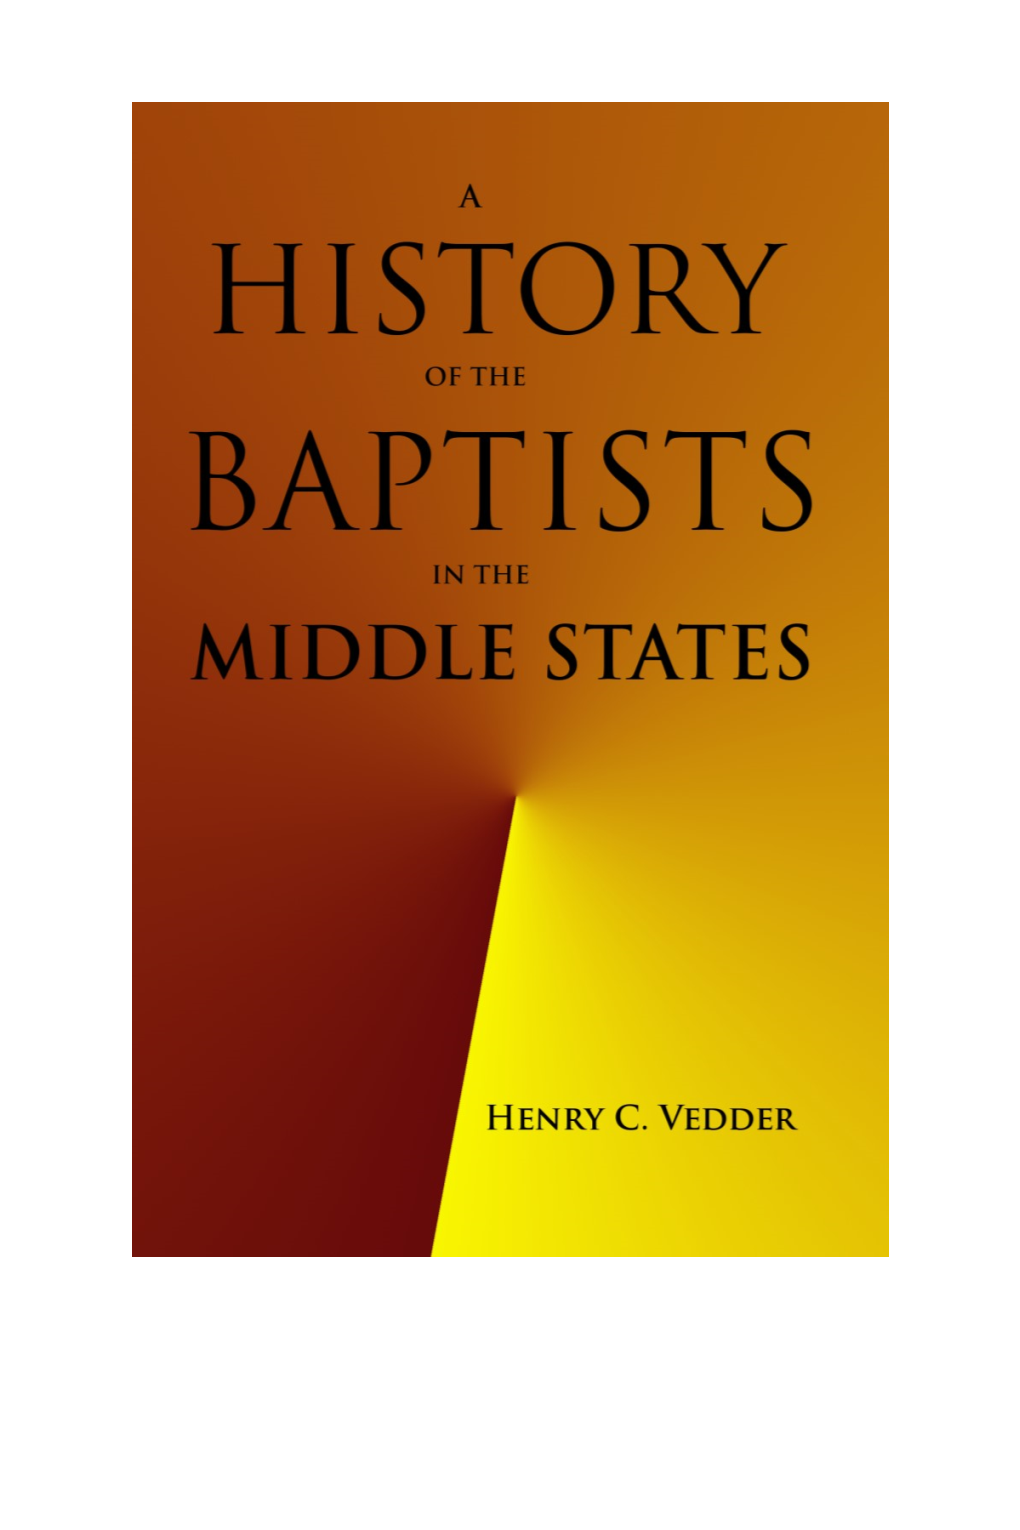 A History of the Baptists in the Middle States